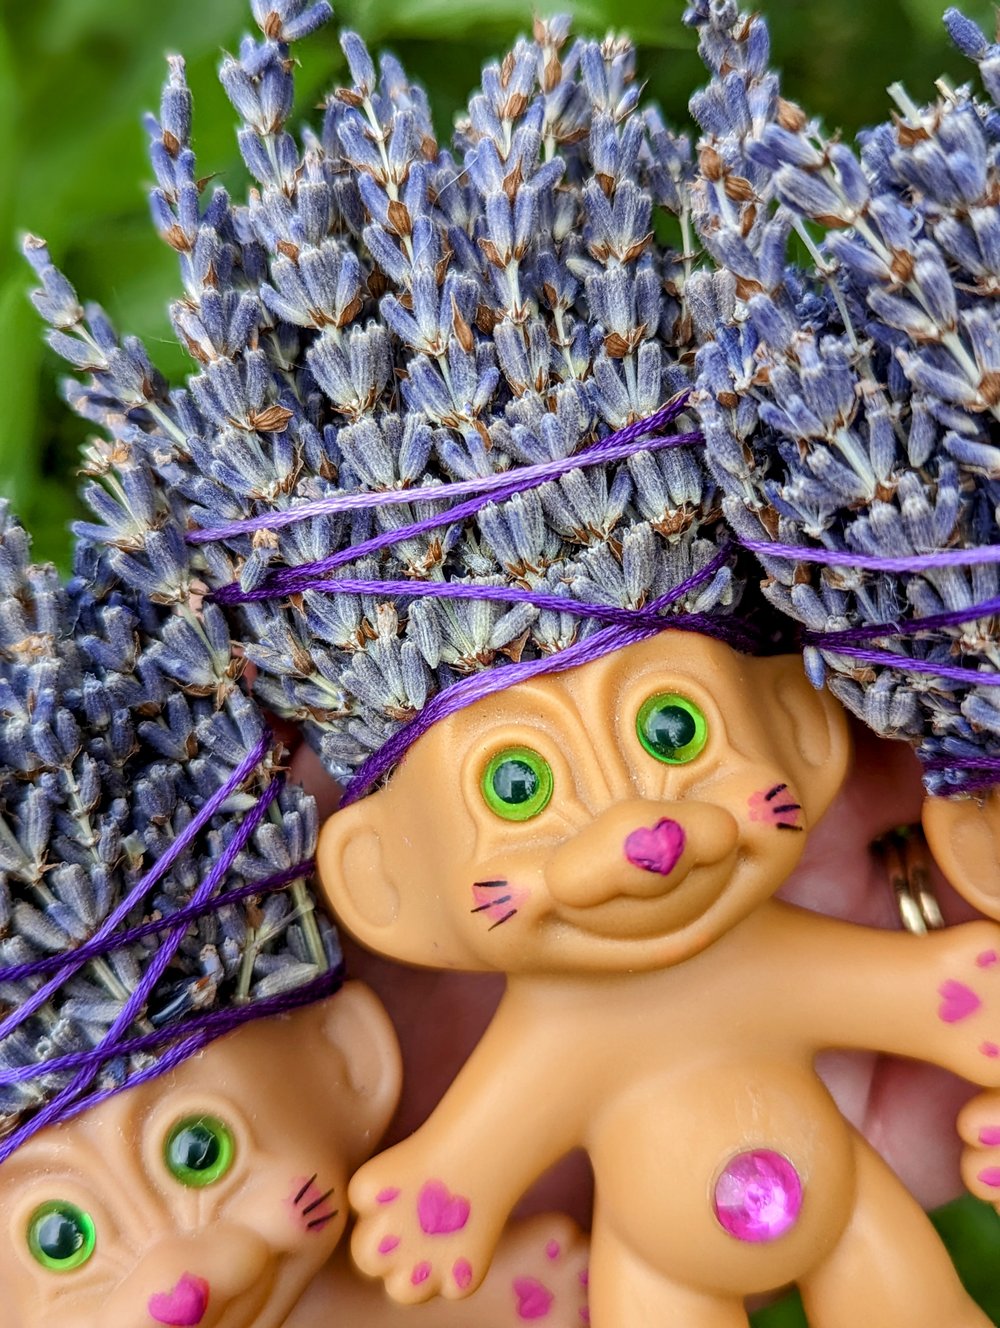 Lavender Kitty Troll with green eyes 5"